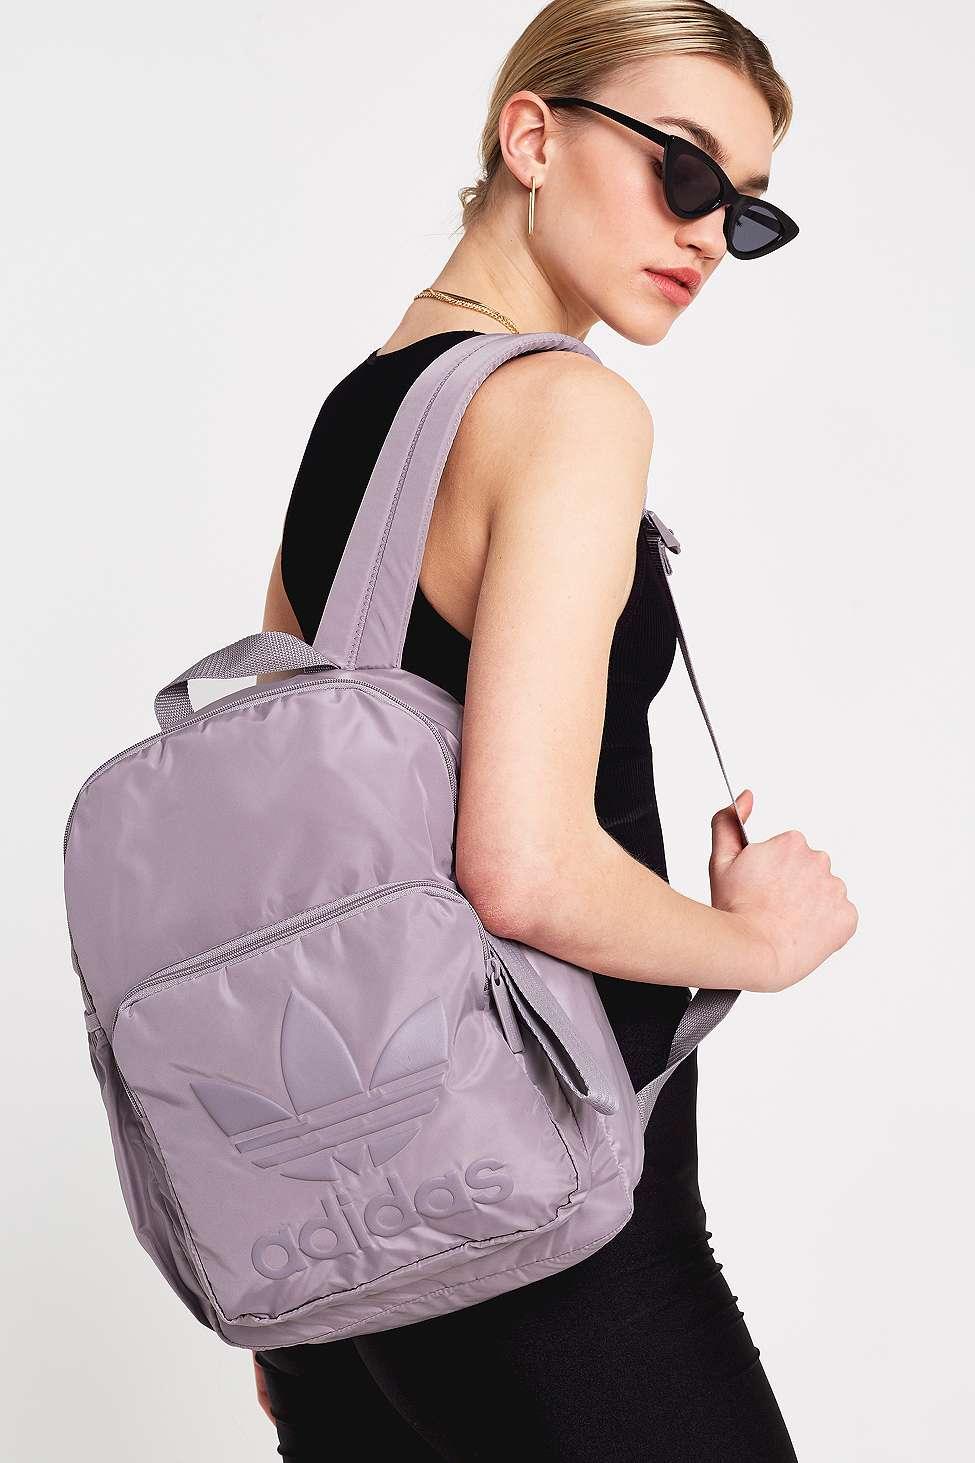 Adidas Backpack Medium Luxembourg, SAVE 54% - modelcon.sk